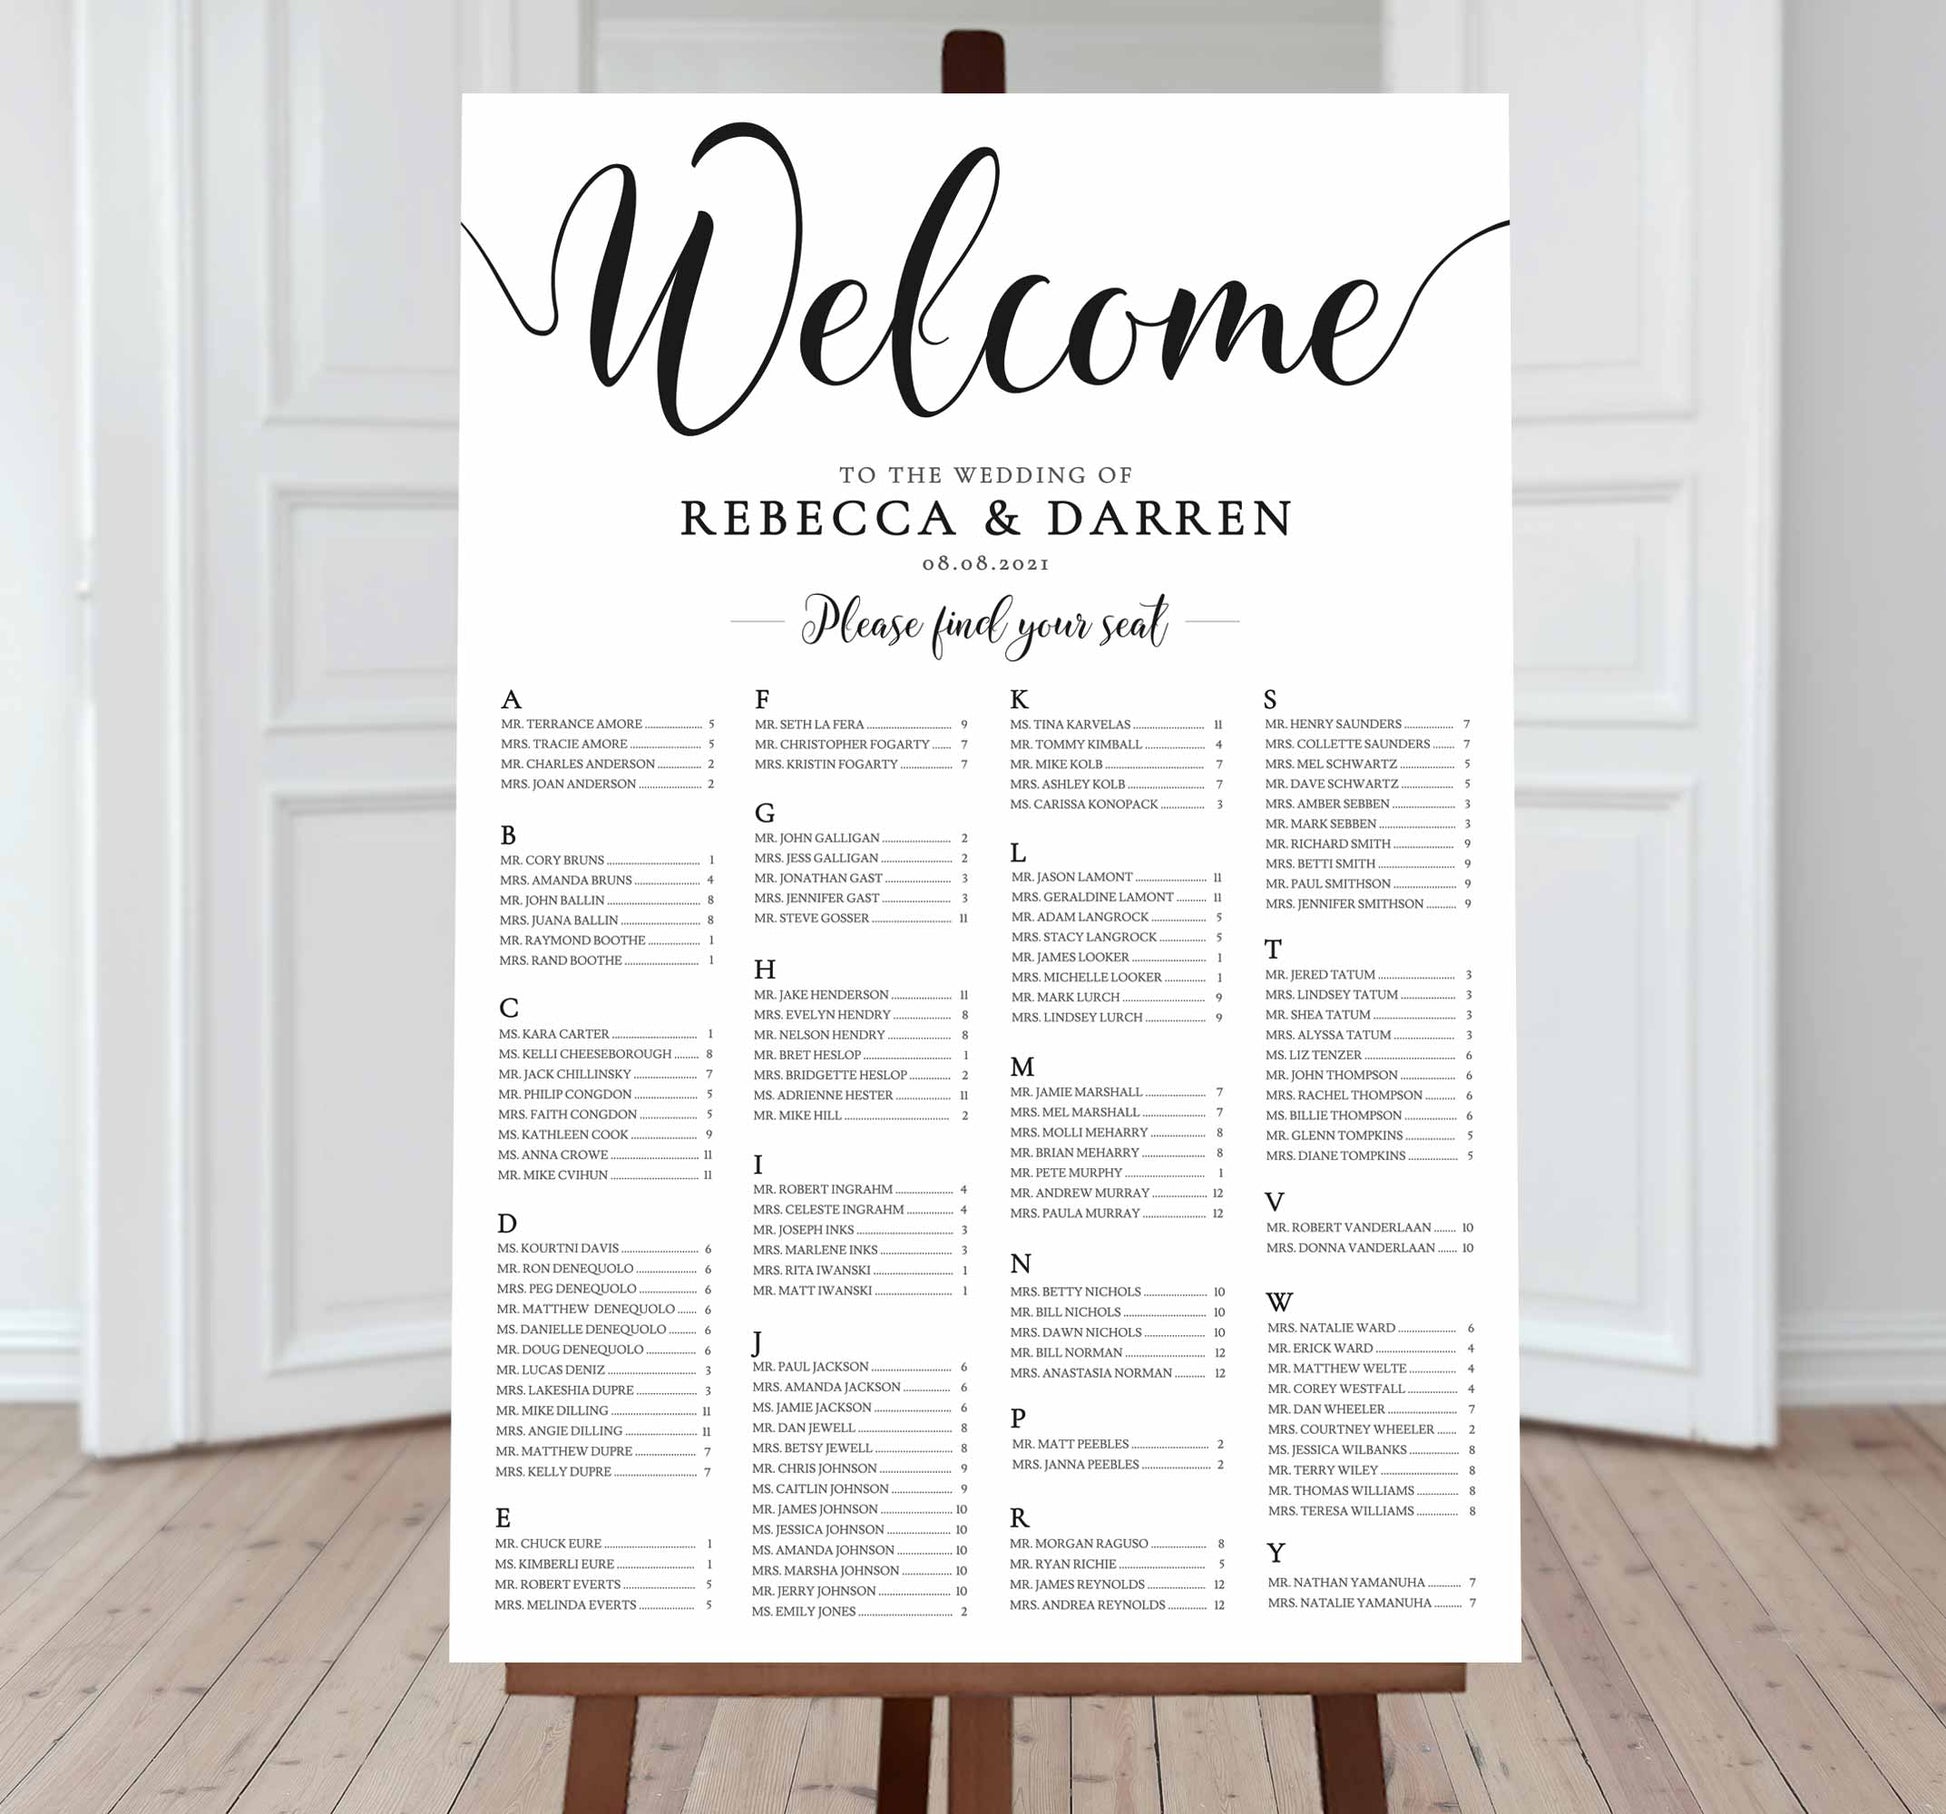 welcome wedding seating chart with black text alphabetical order